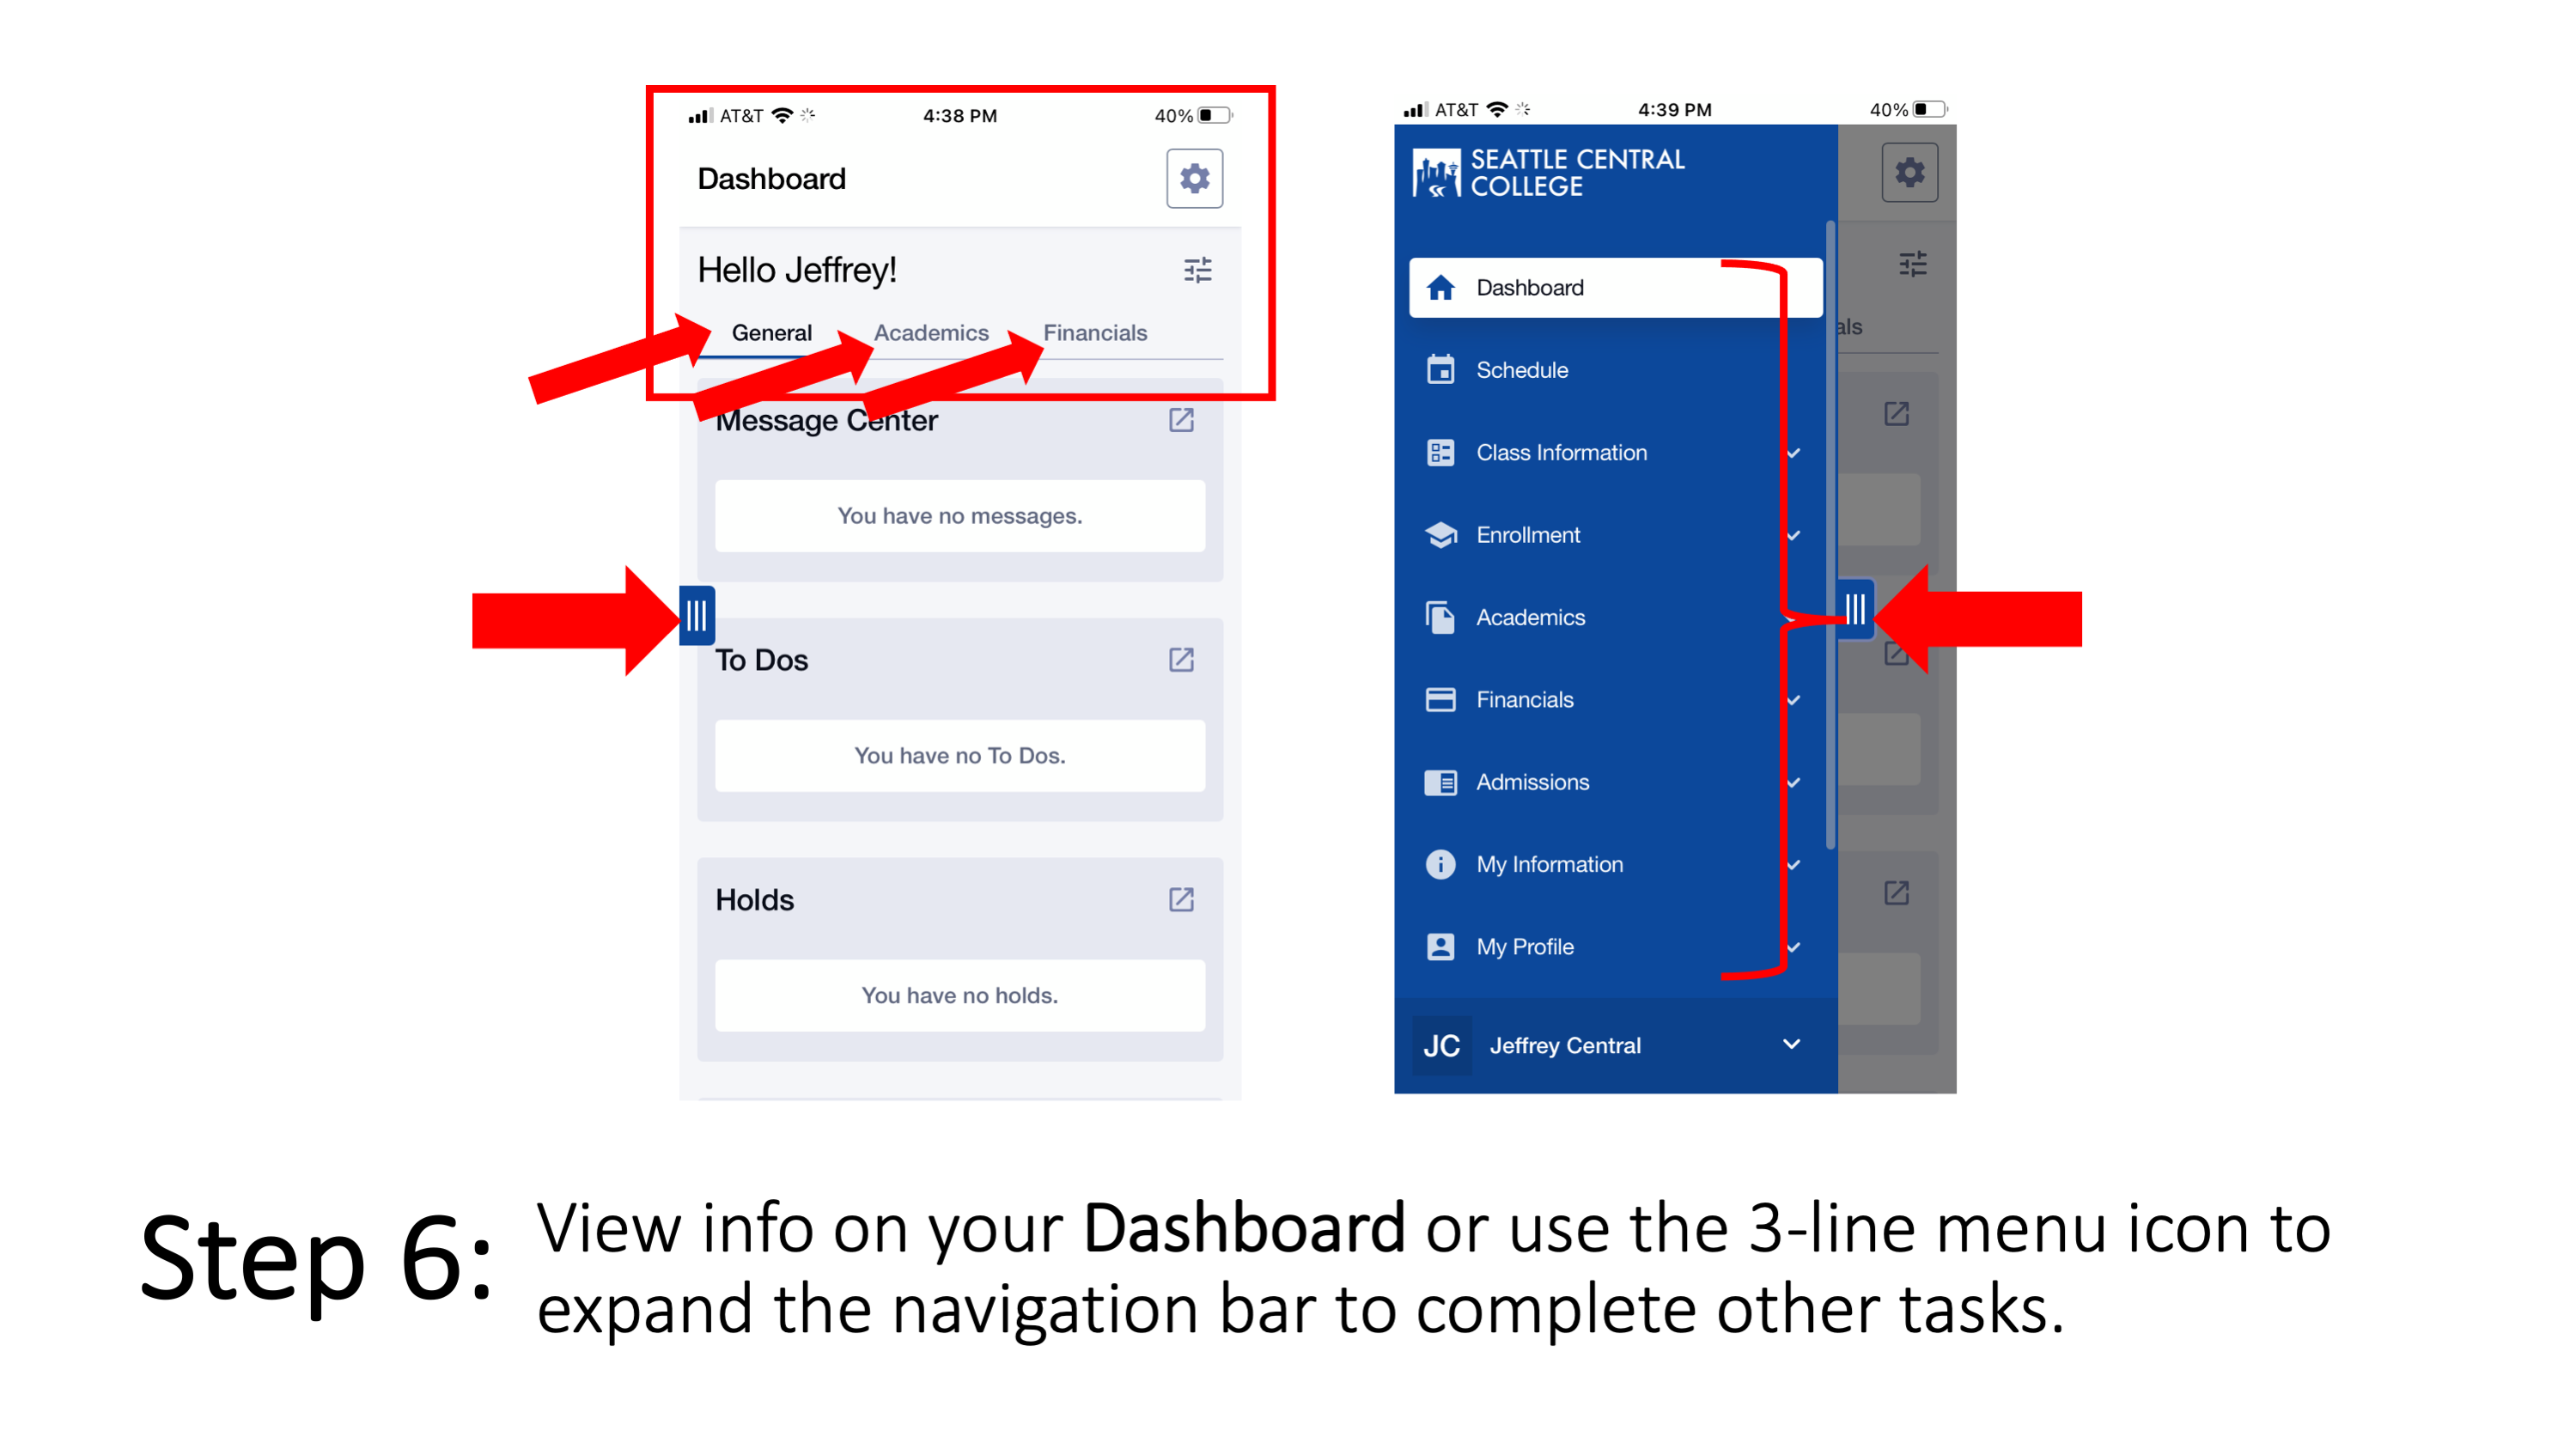 Step 6: View info on your Dashboard or use the 3-line menu icon to expand the navigation bar to complete other tasks. 